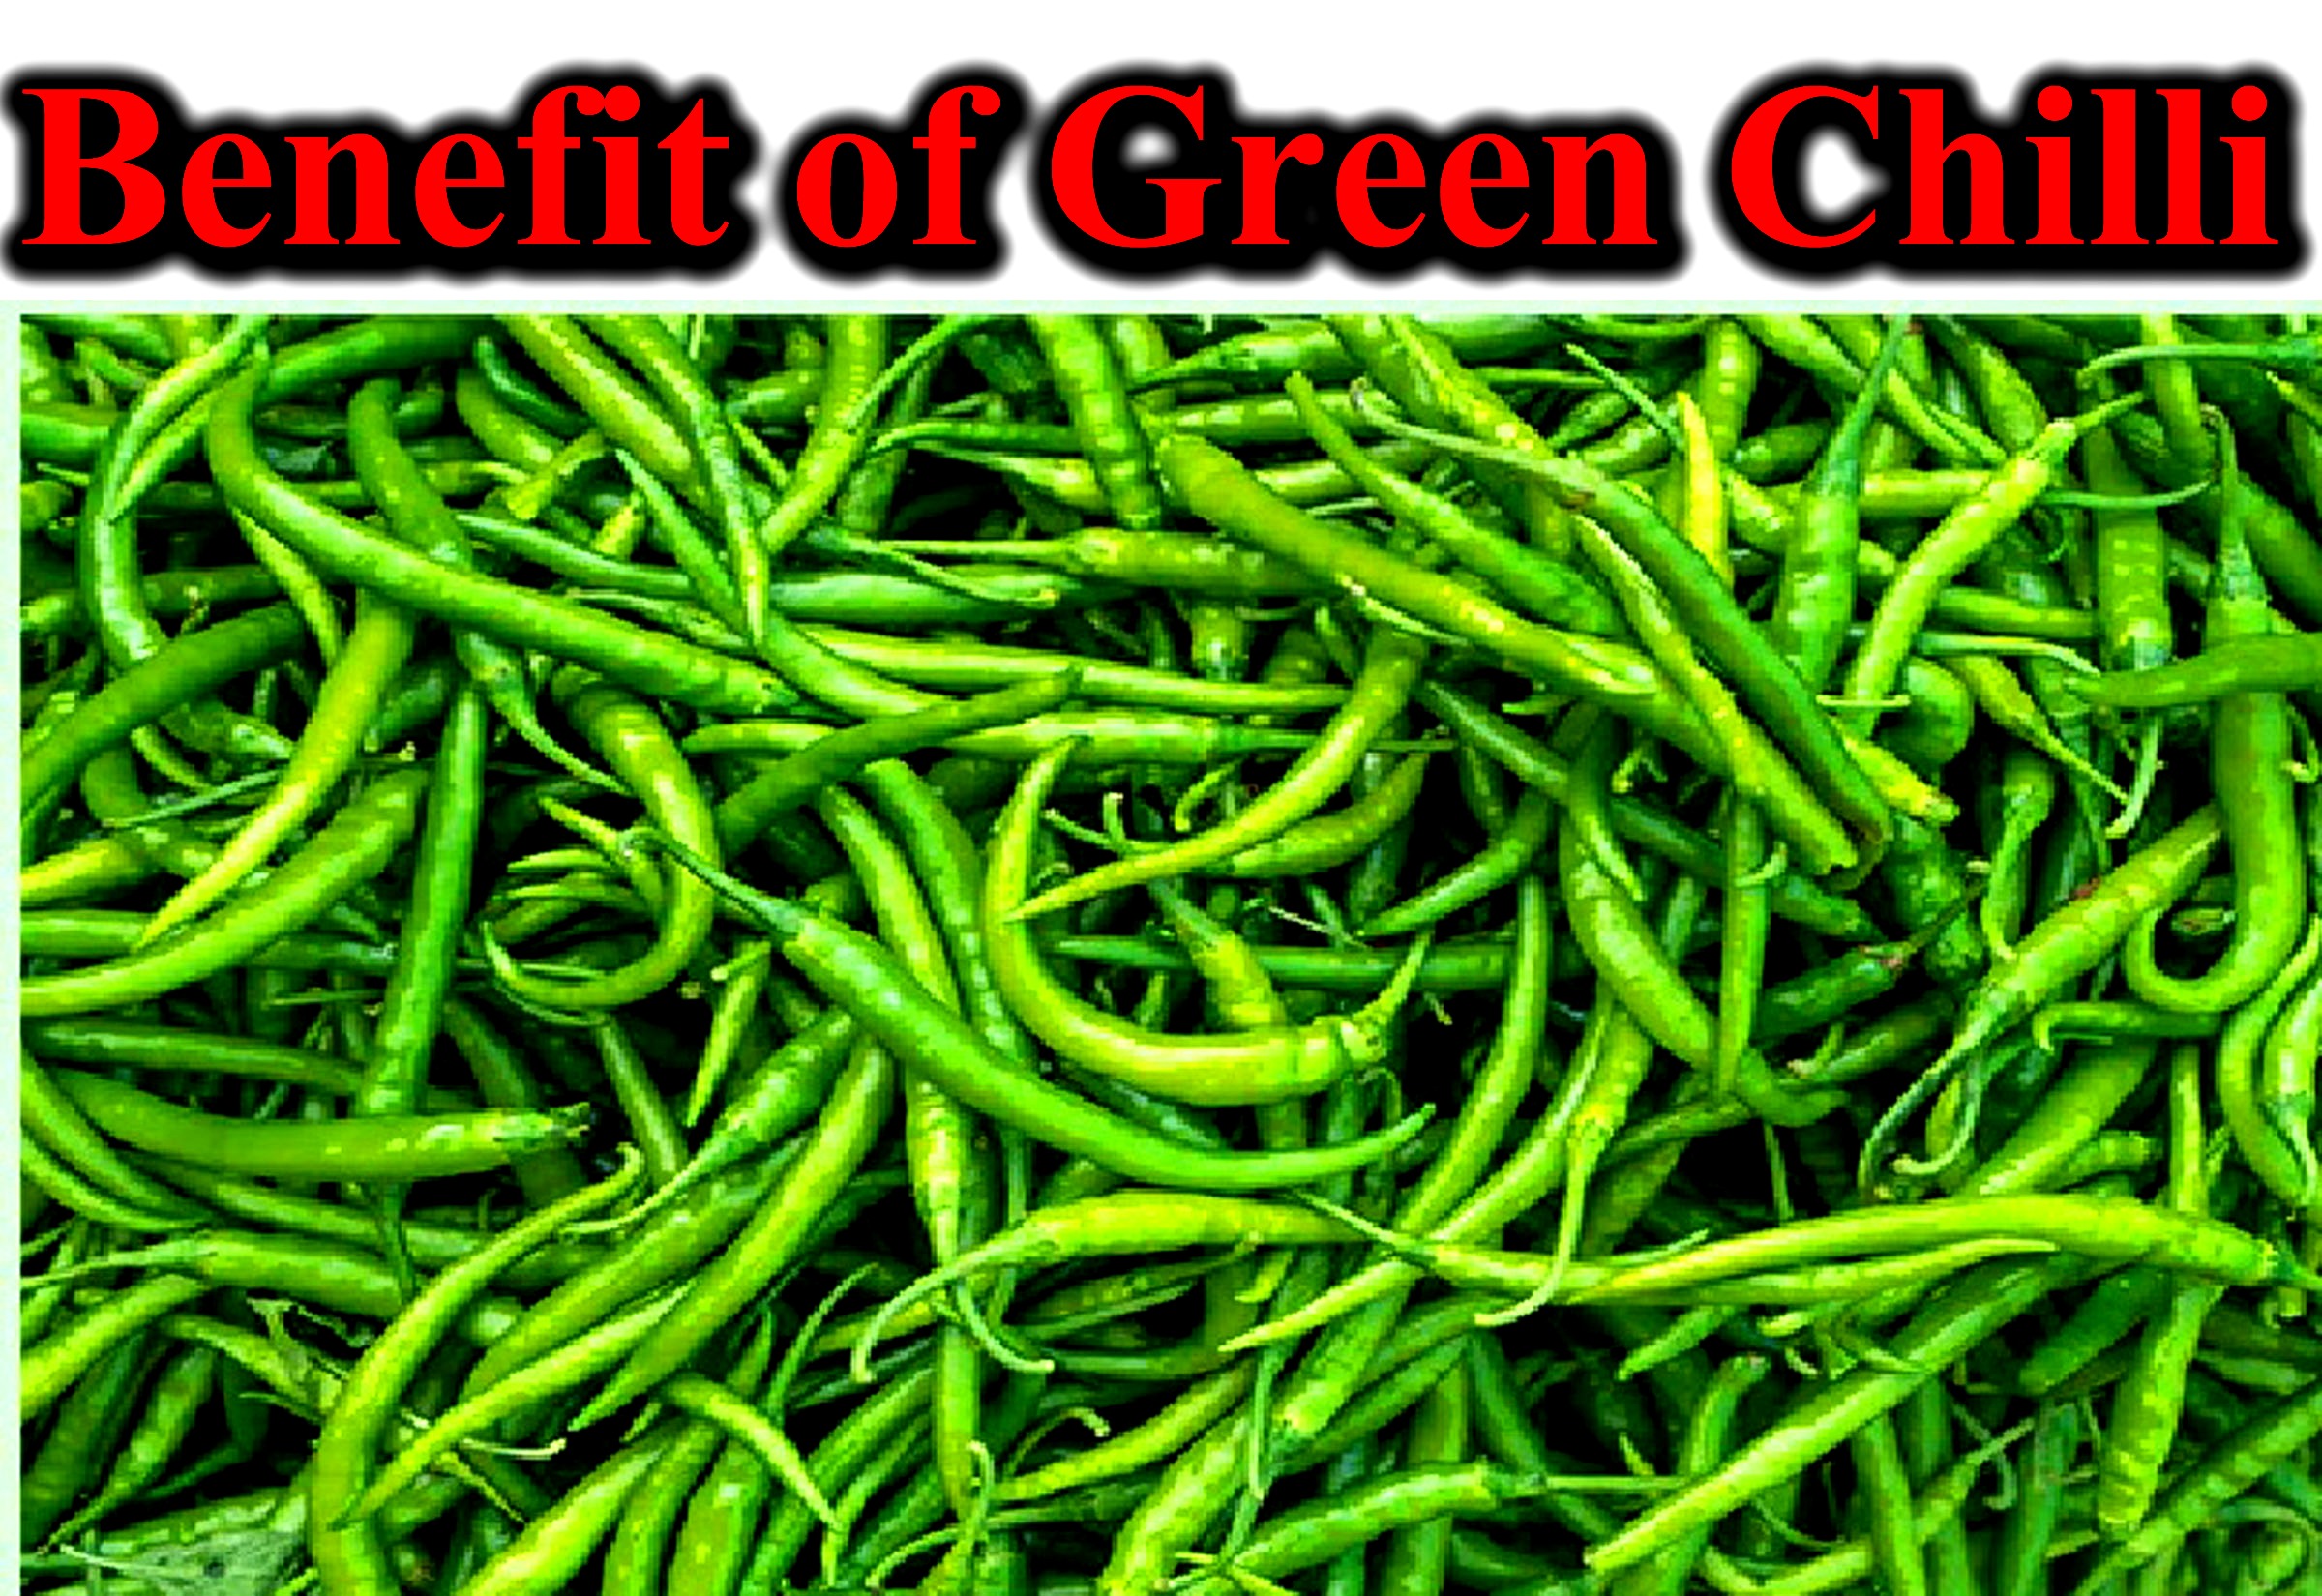 What is the benefit of green chilli